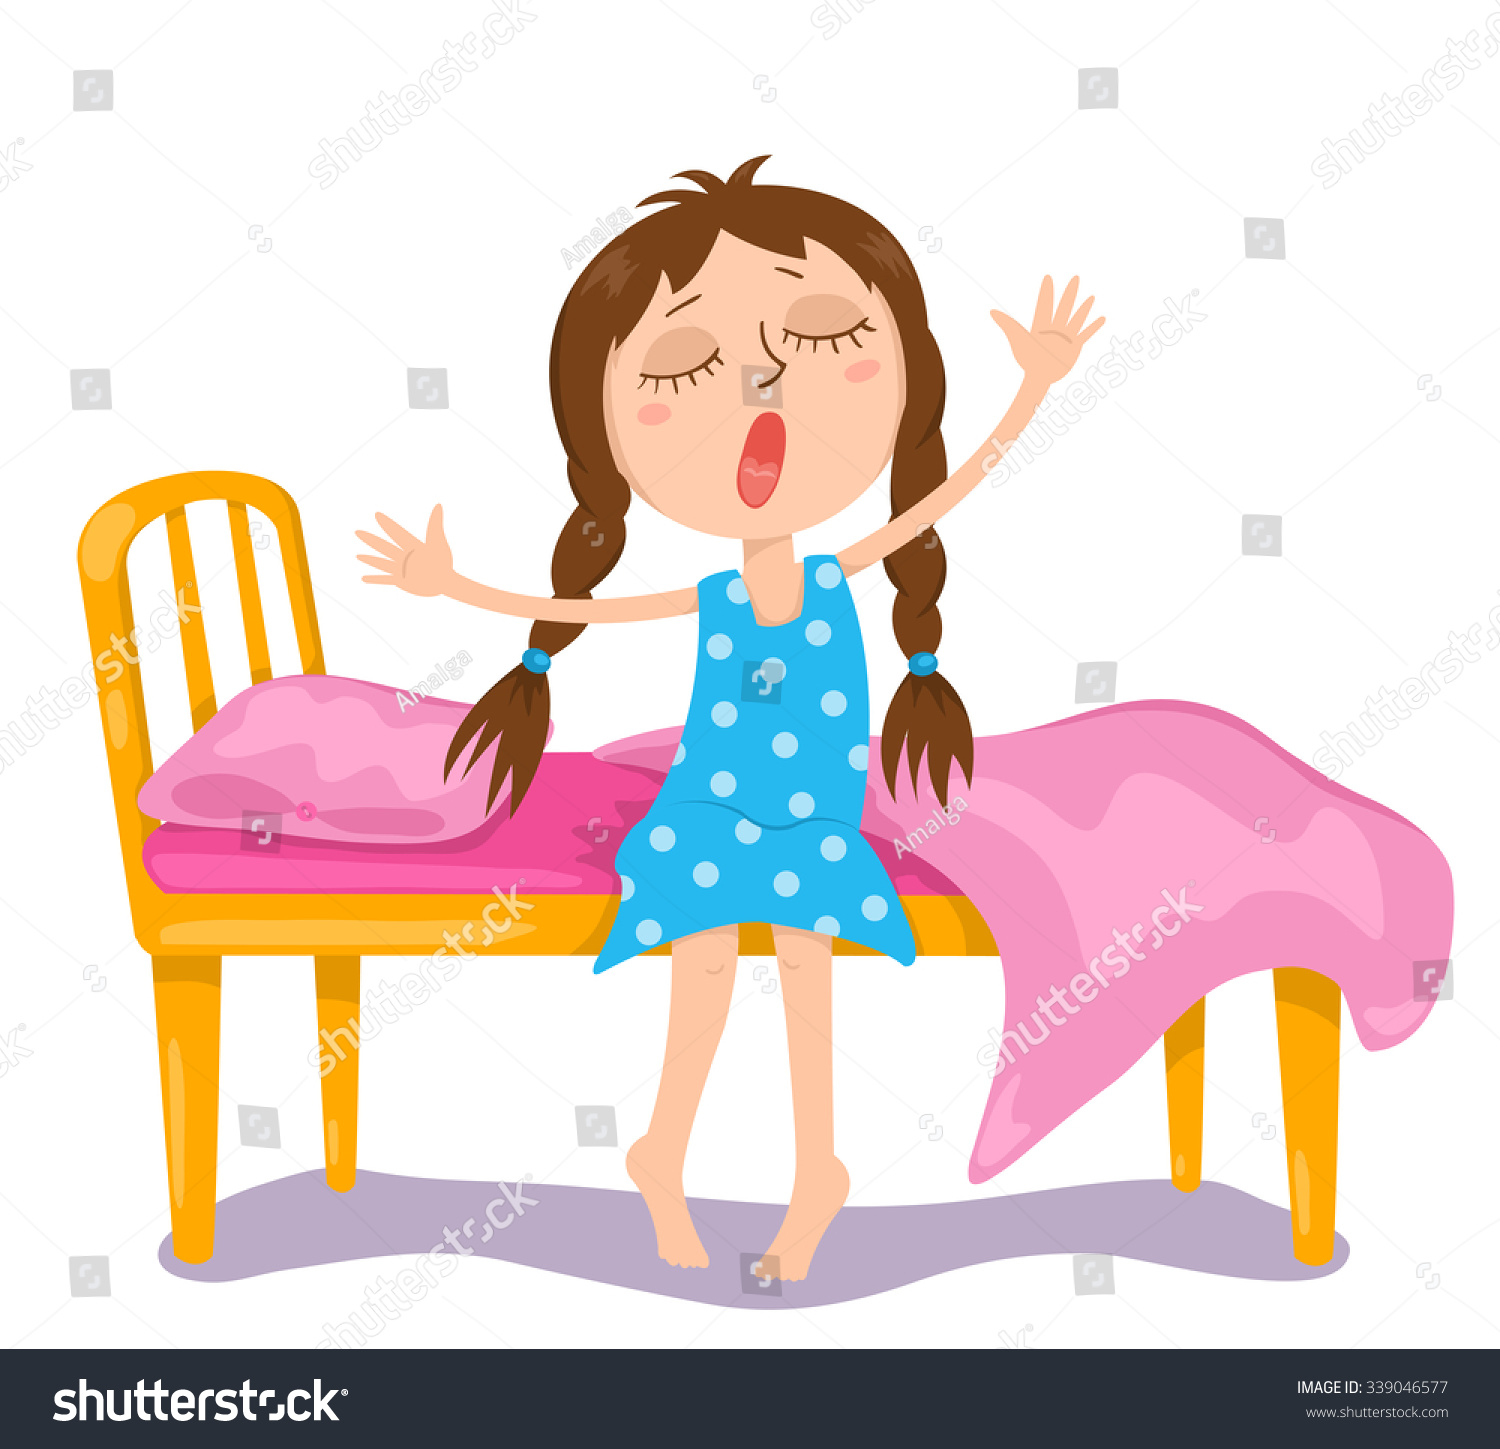 clipart of girl waking up - photo #46